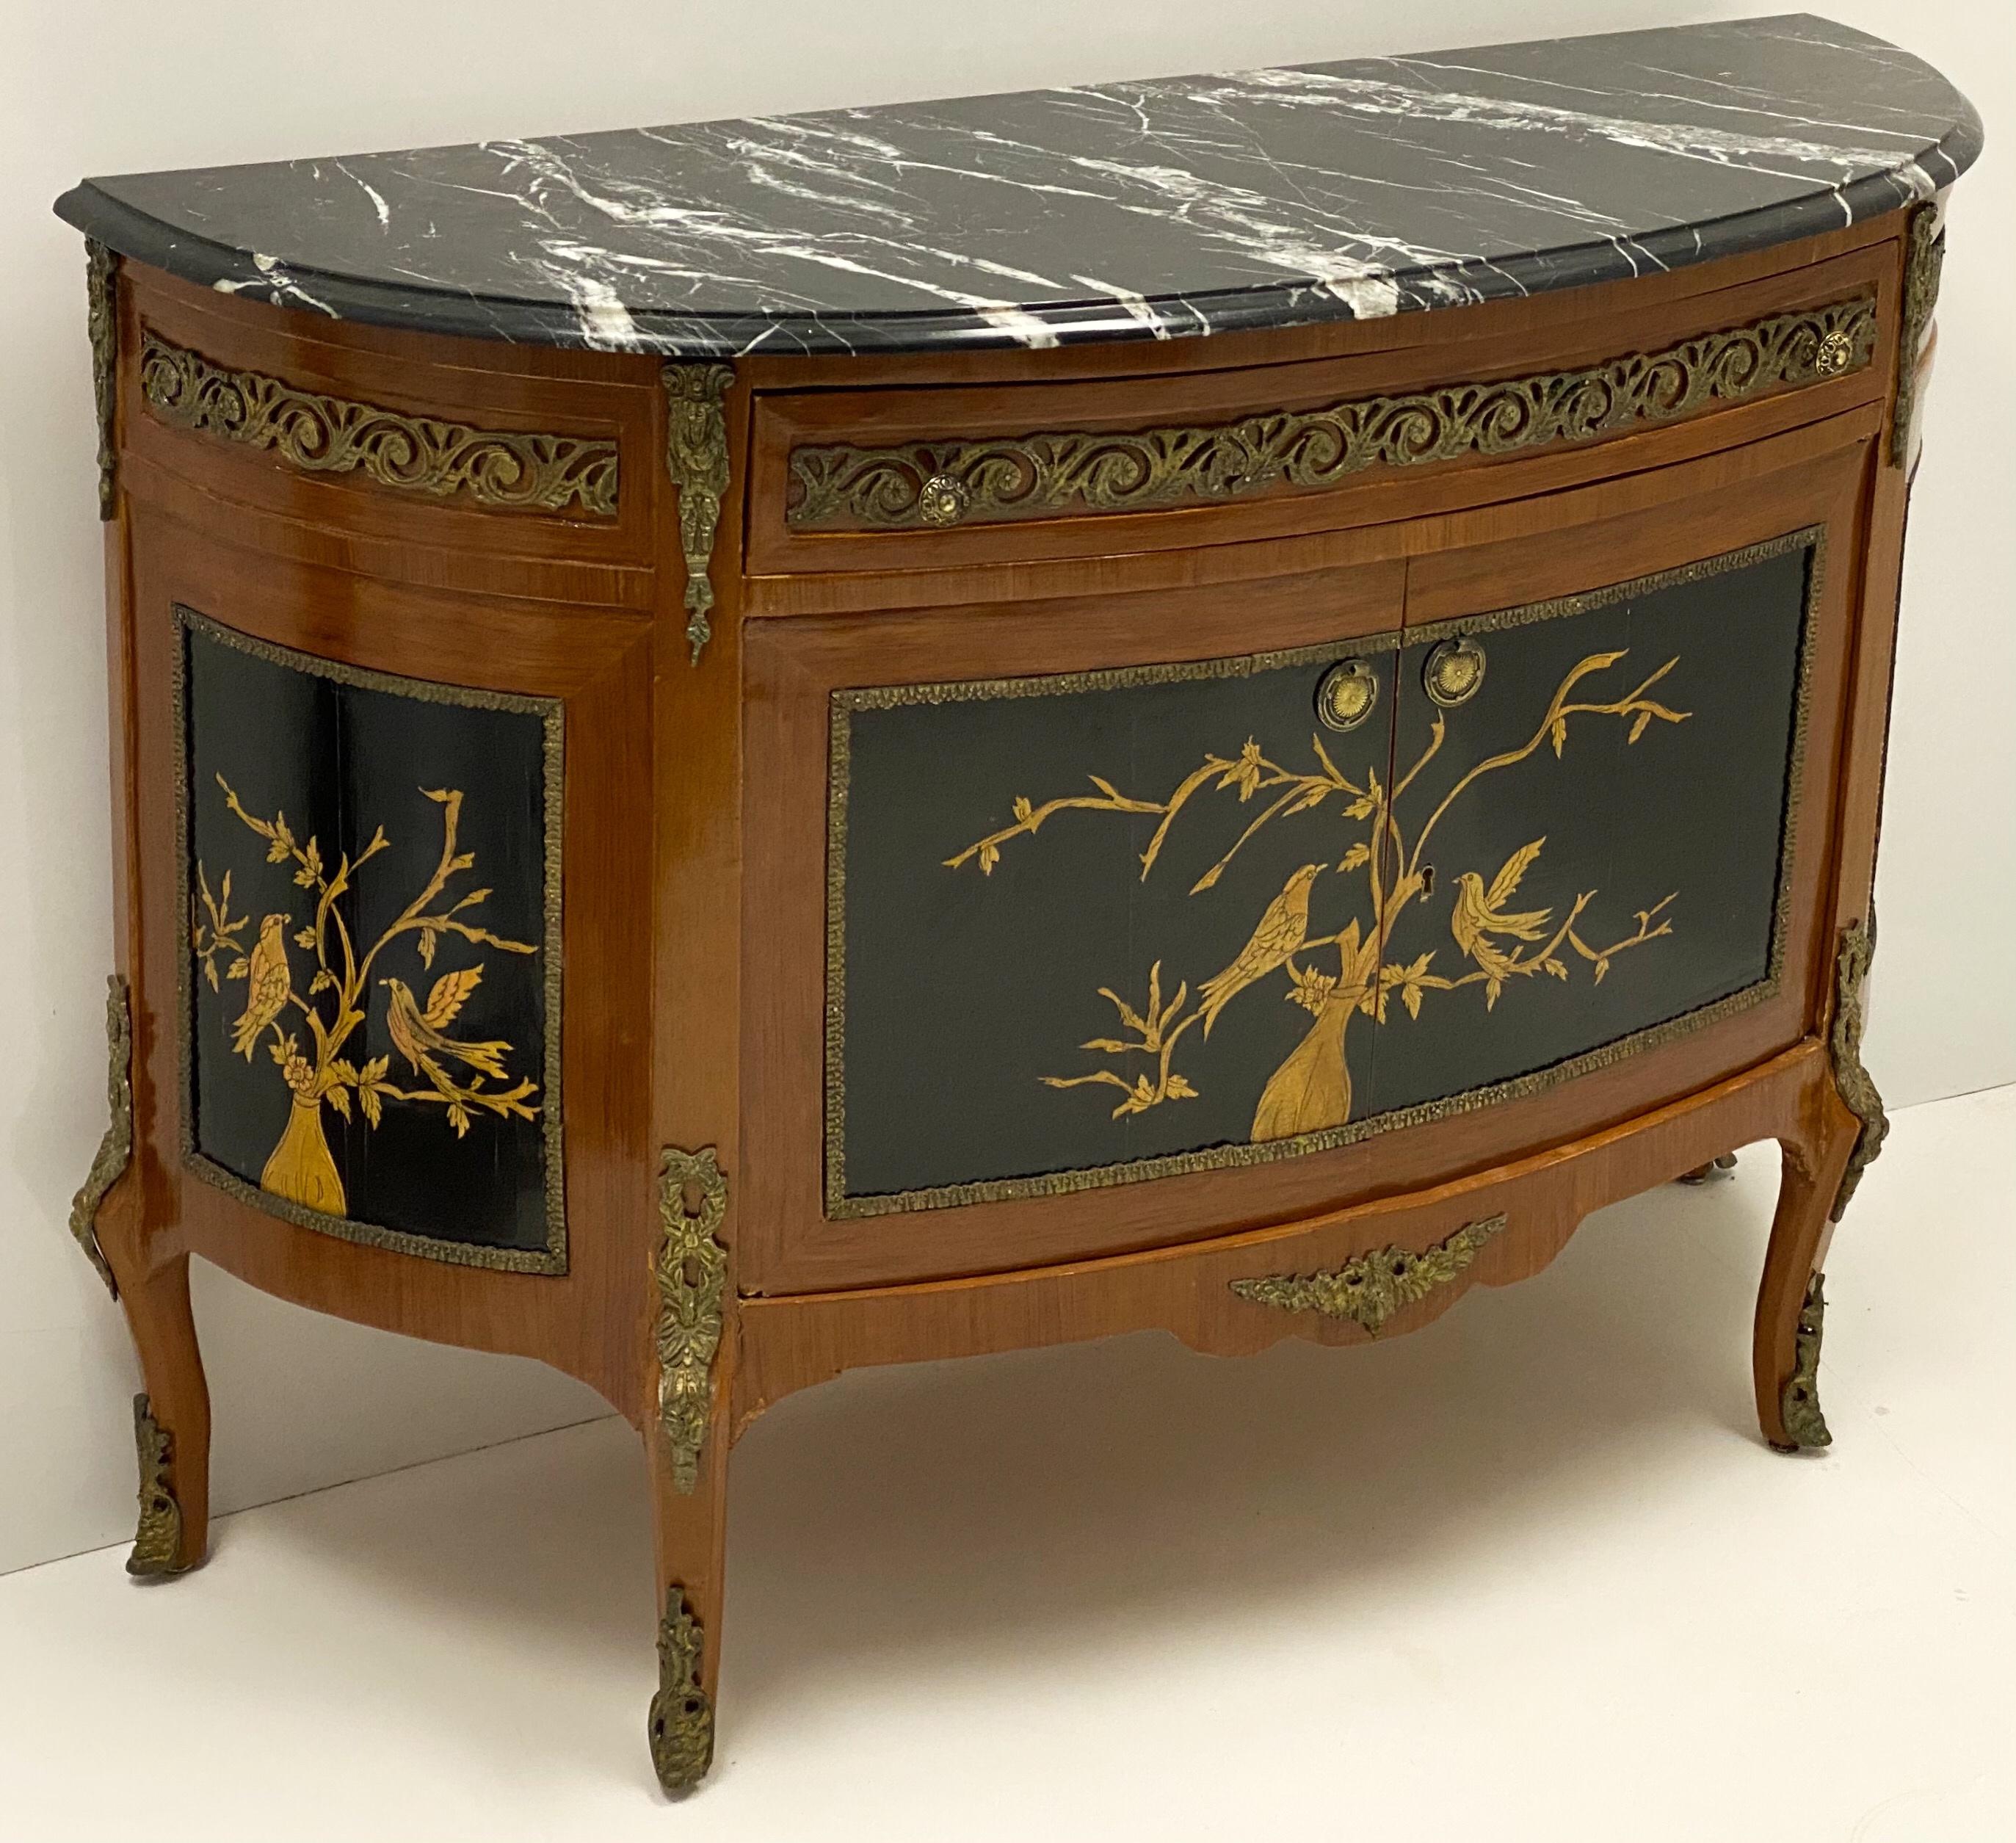 This is a 1950s chinoiserie demilune cabinet with marble top and bronze surmounts. The gilt birds are on an ebonized panel. It opens to open space. It would work well from foyer to bathroom. The piece is most likely Italian. It is unmarked and in